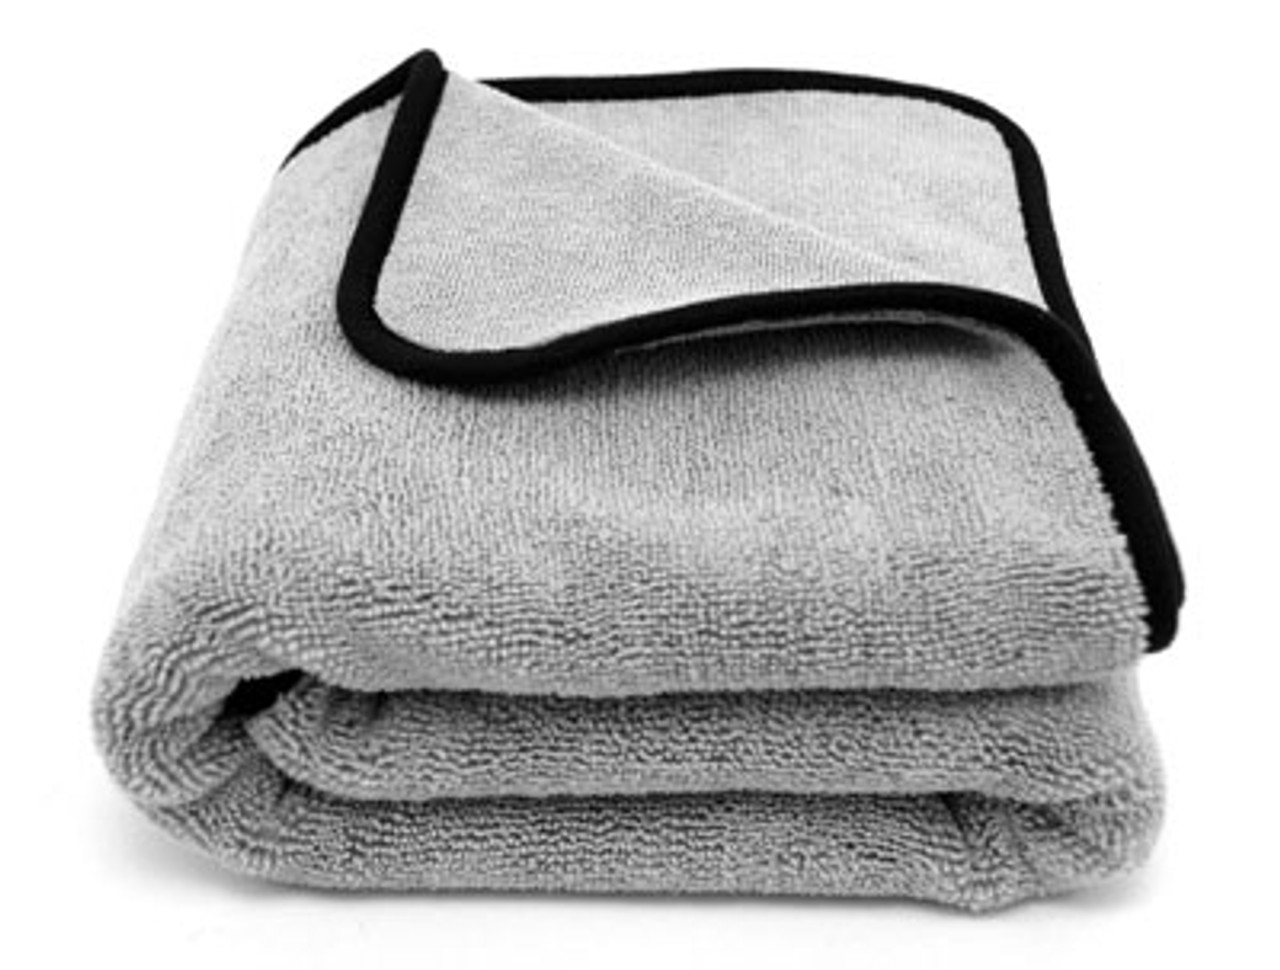 Can a Towel Be Too Thick?